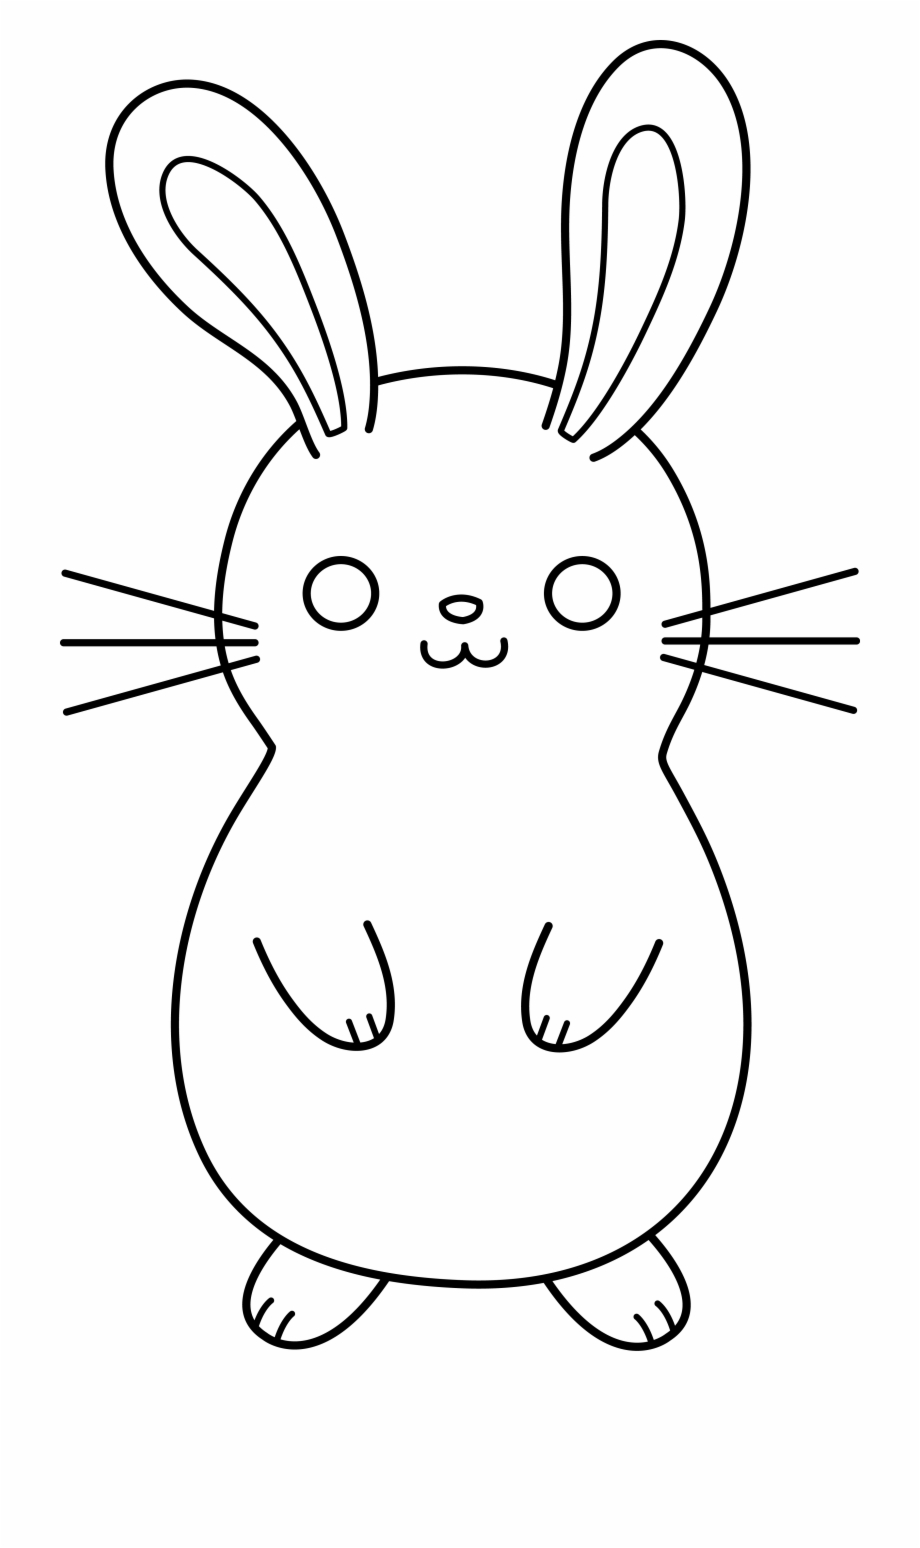 Drawn Bunny Chubby Bunny Things To Draw Easter